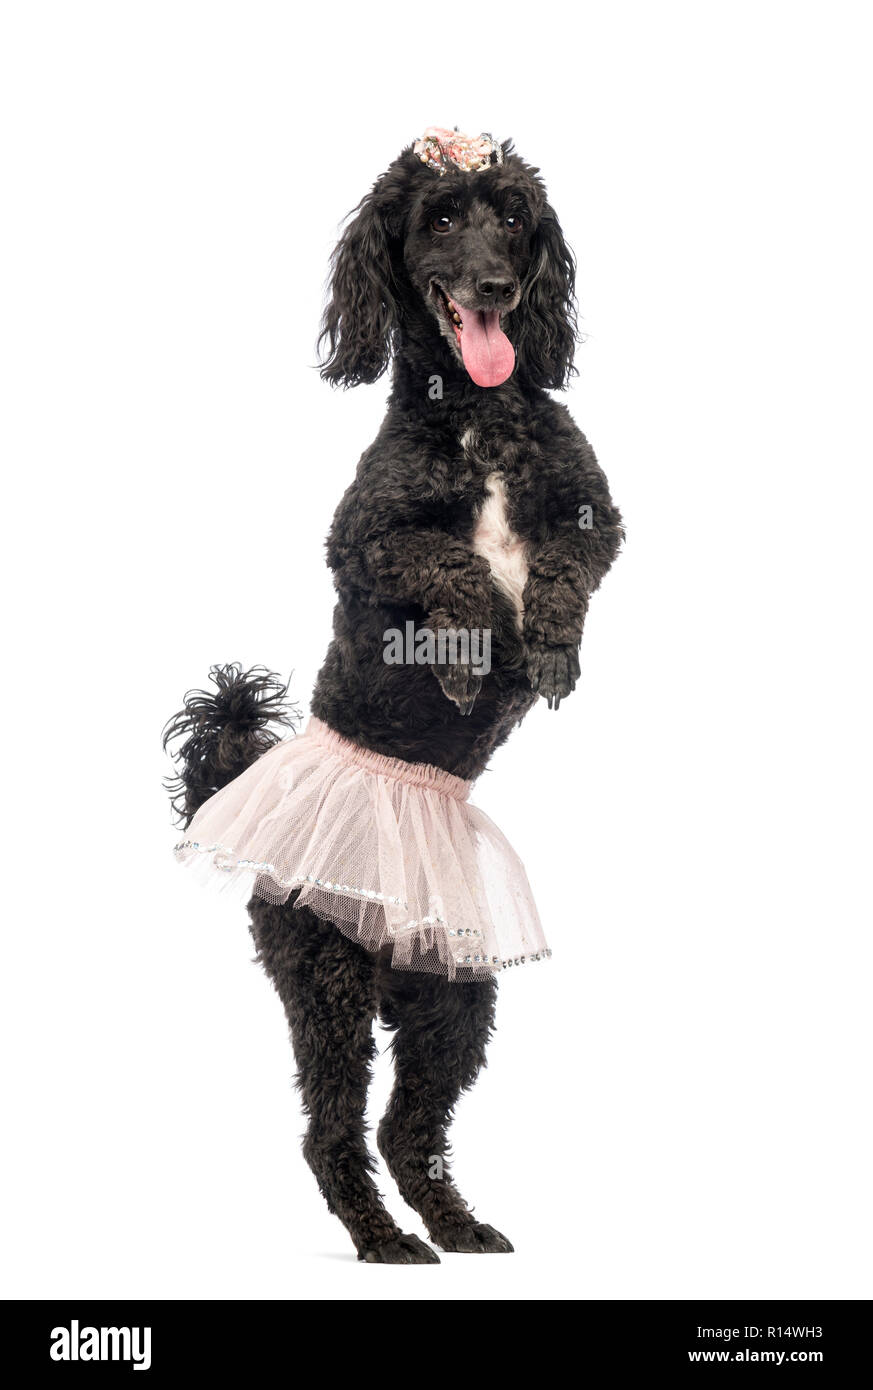 Poodle, 5 years old, standing, dancing, wearing a pink tutu and panting in front of white background Stock Photo